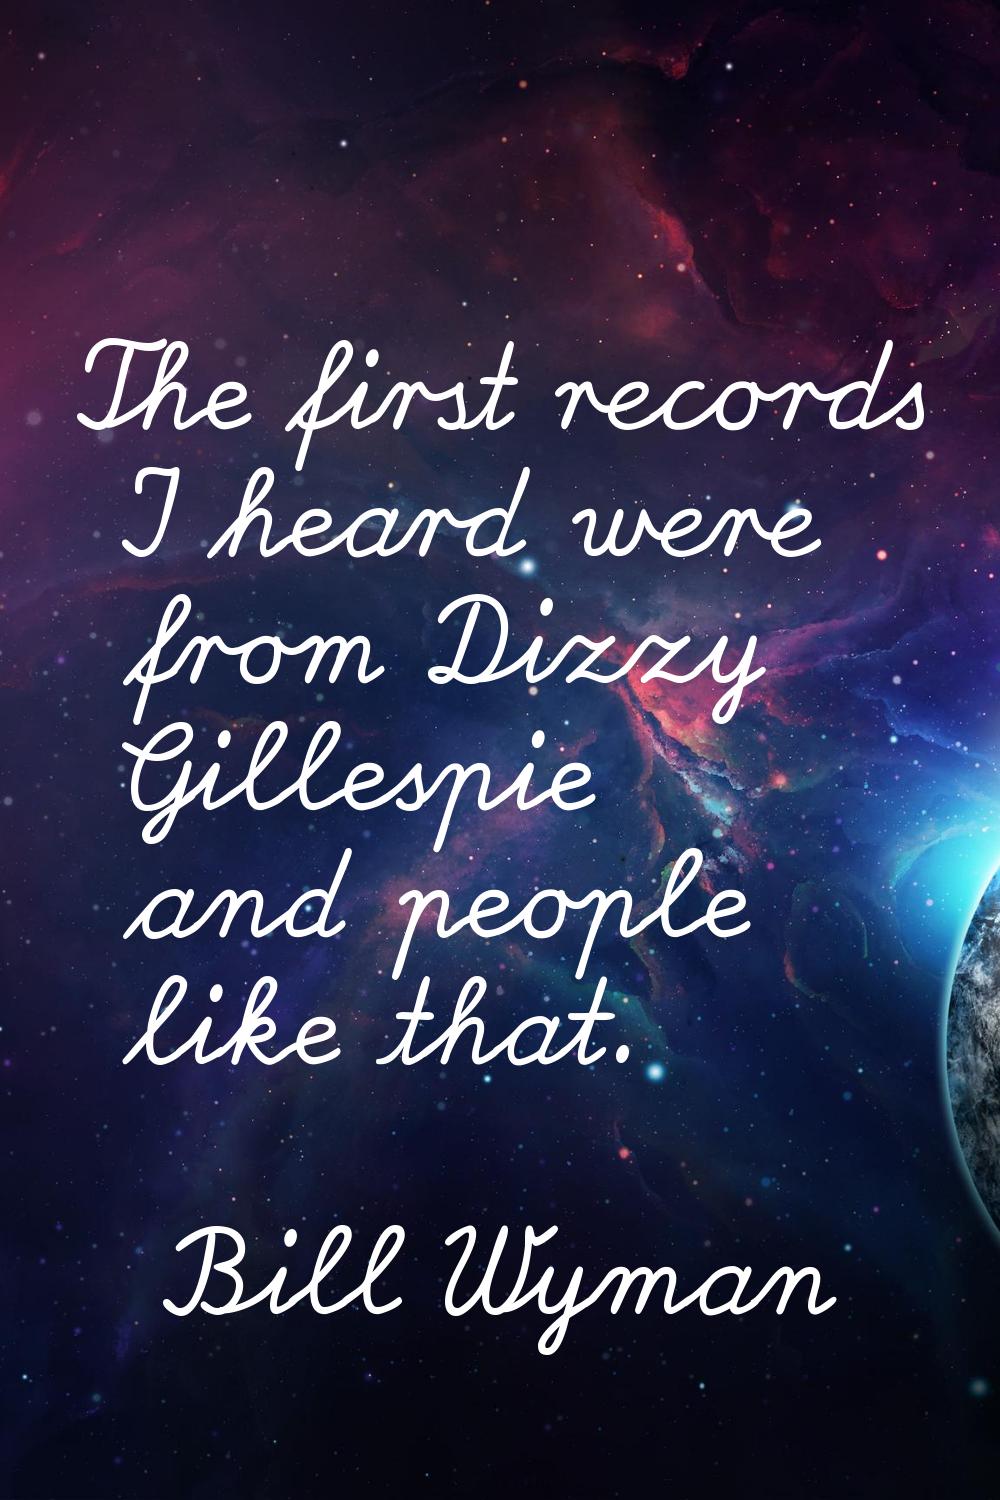 The first records I heard were from Dizzy Gillespie and people like that.